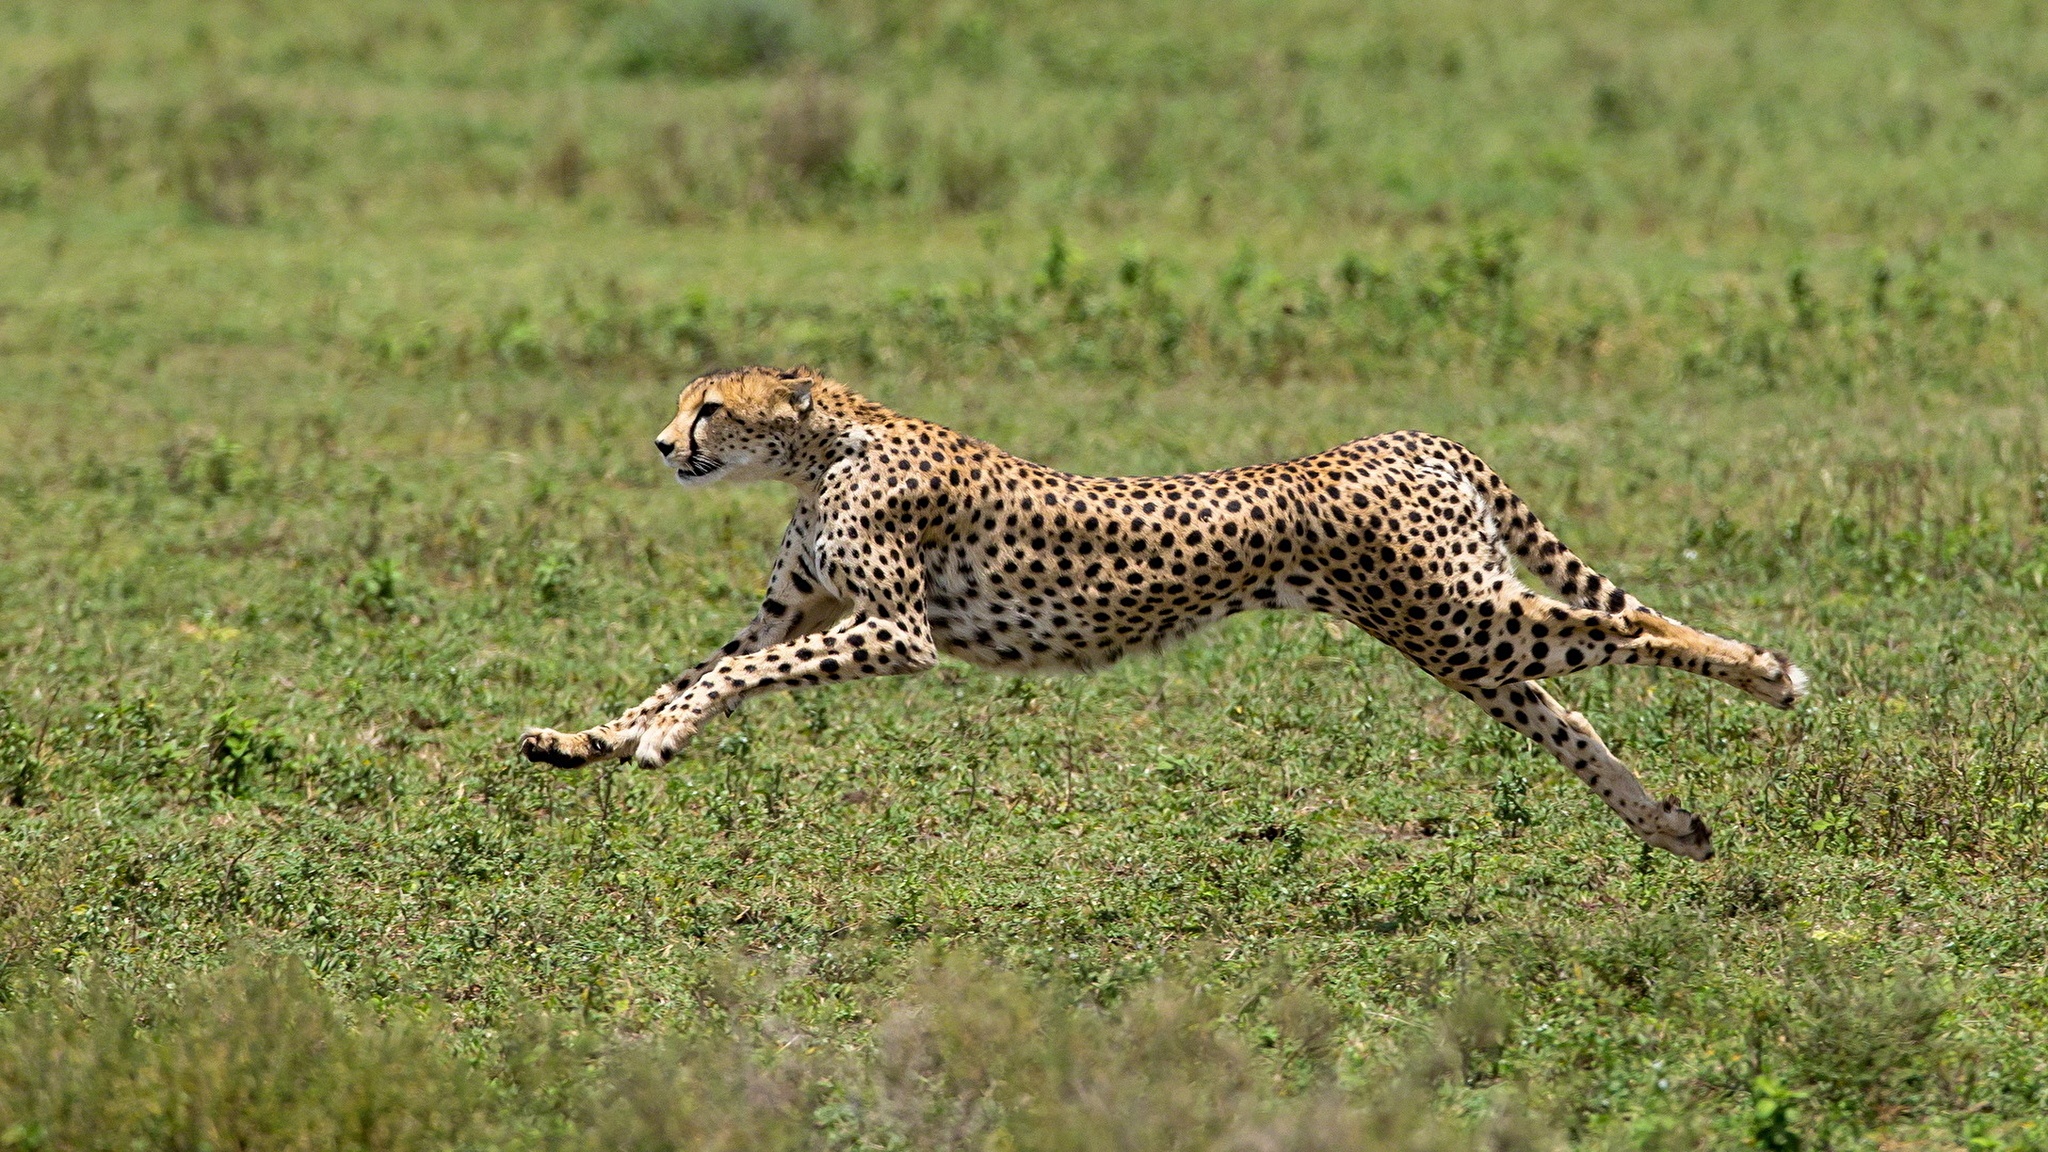 How long does a cheetah have to rest after running?